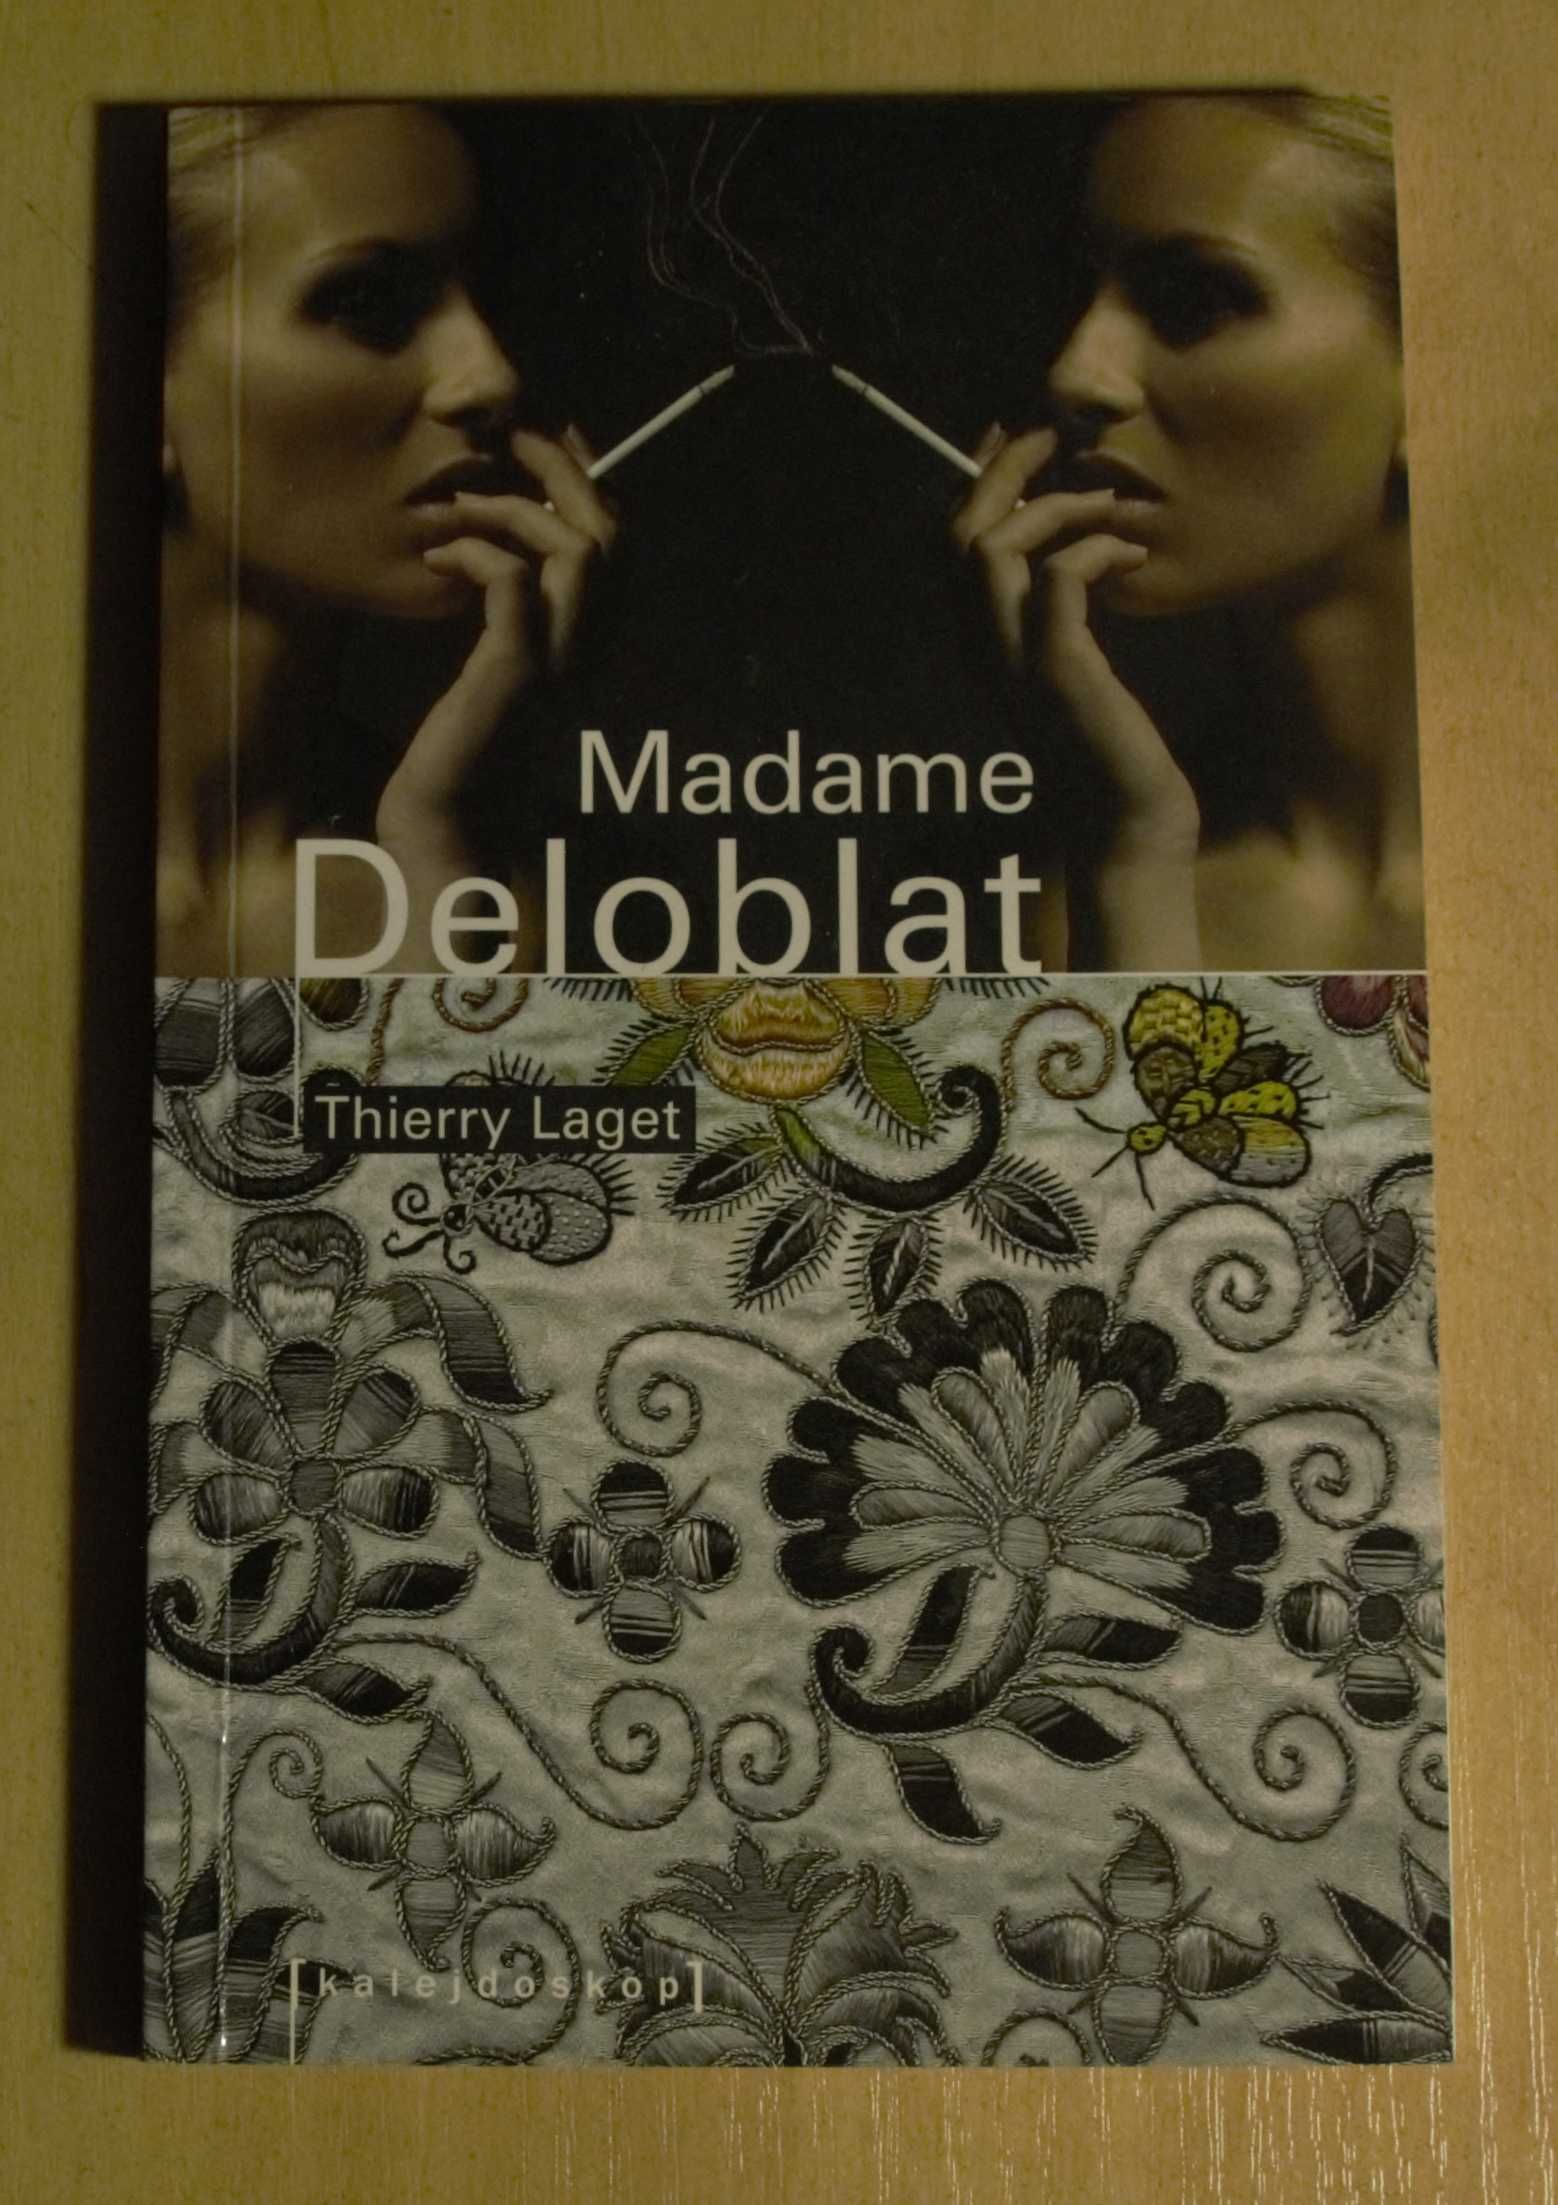 Madame Deloblat – Thierry Laget